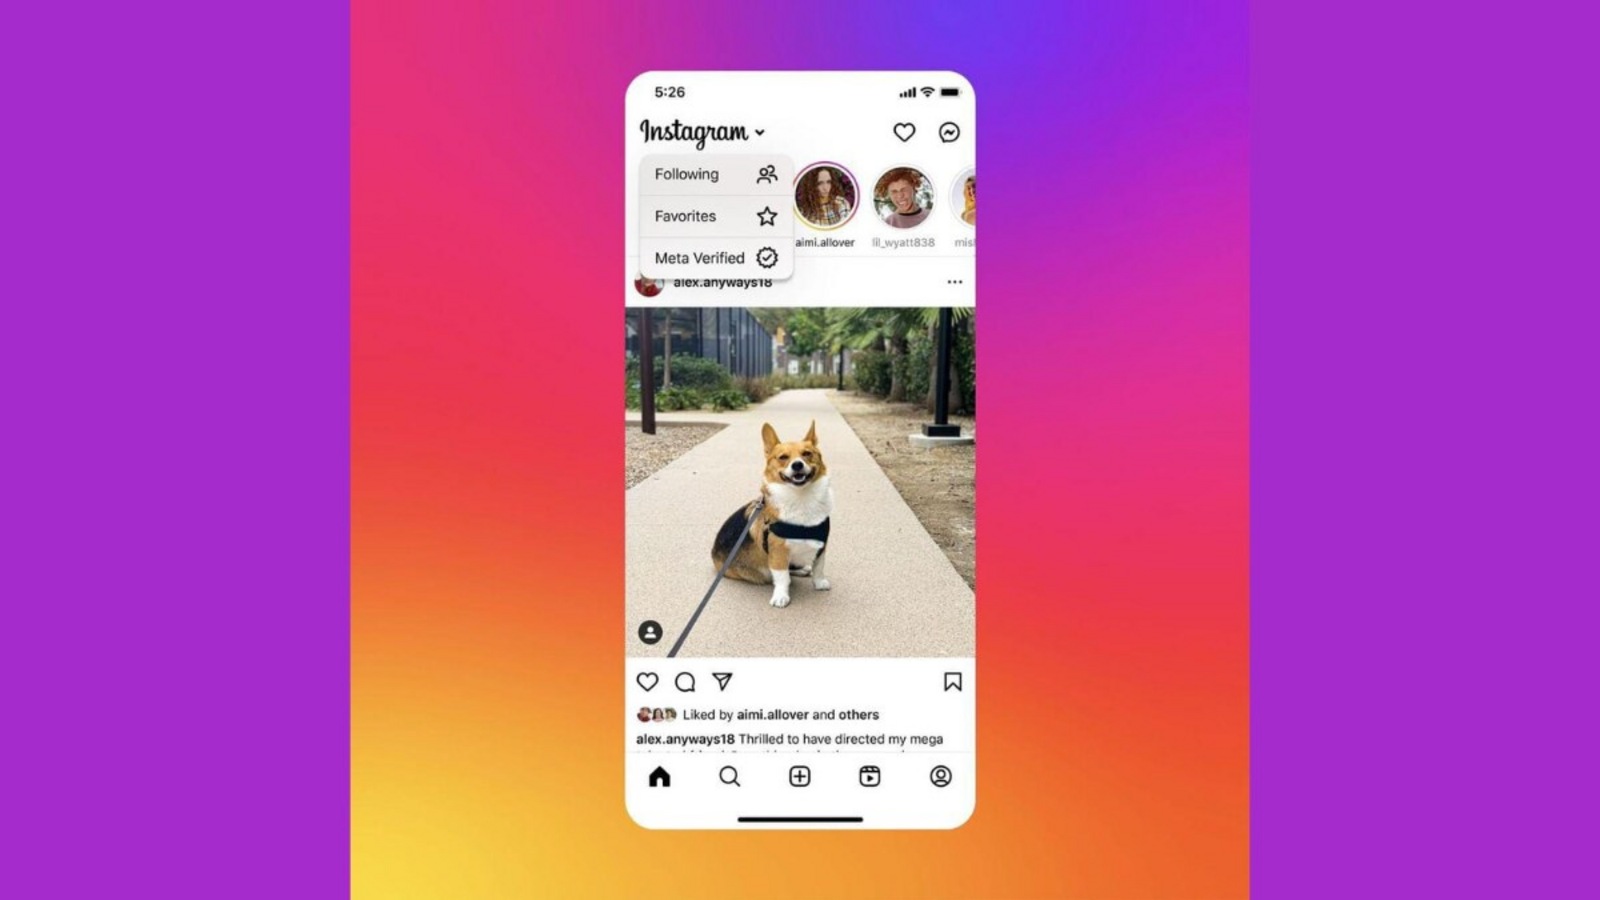 Instagram is testing a new feature that lets you see a Meta verified-only feed